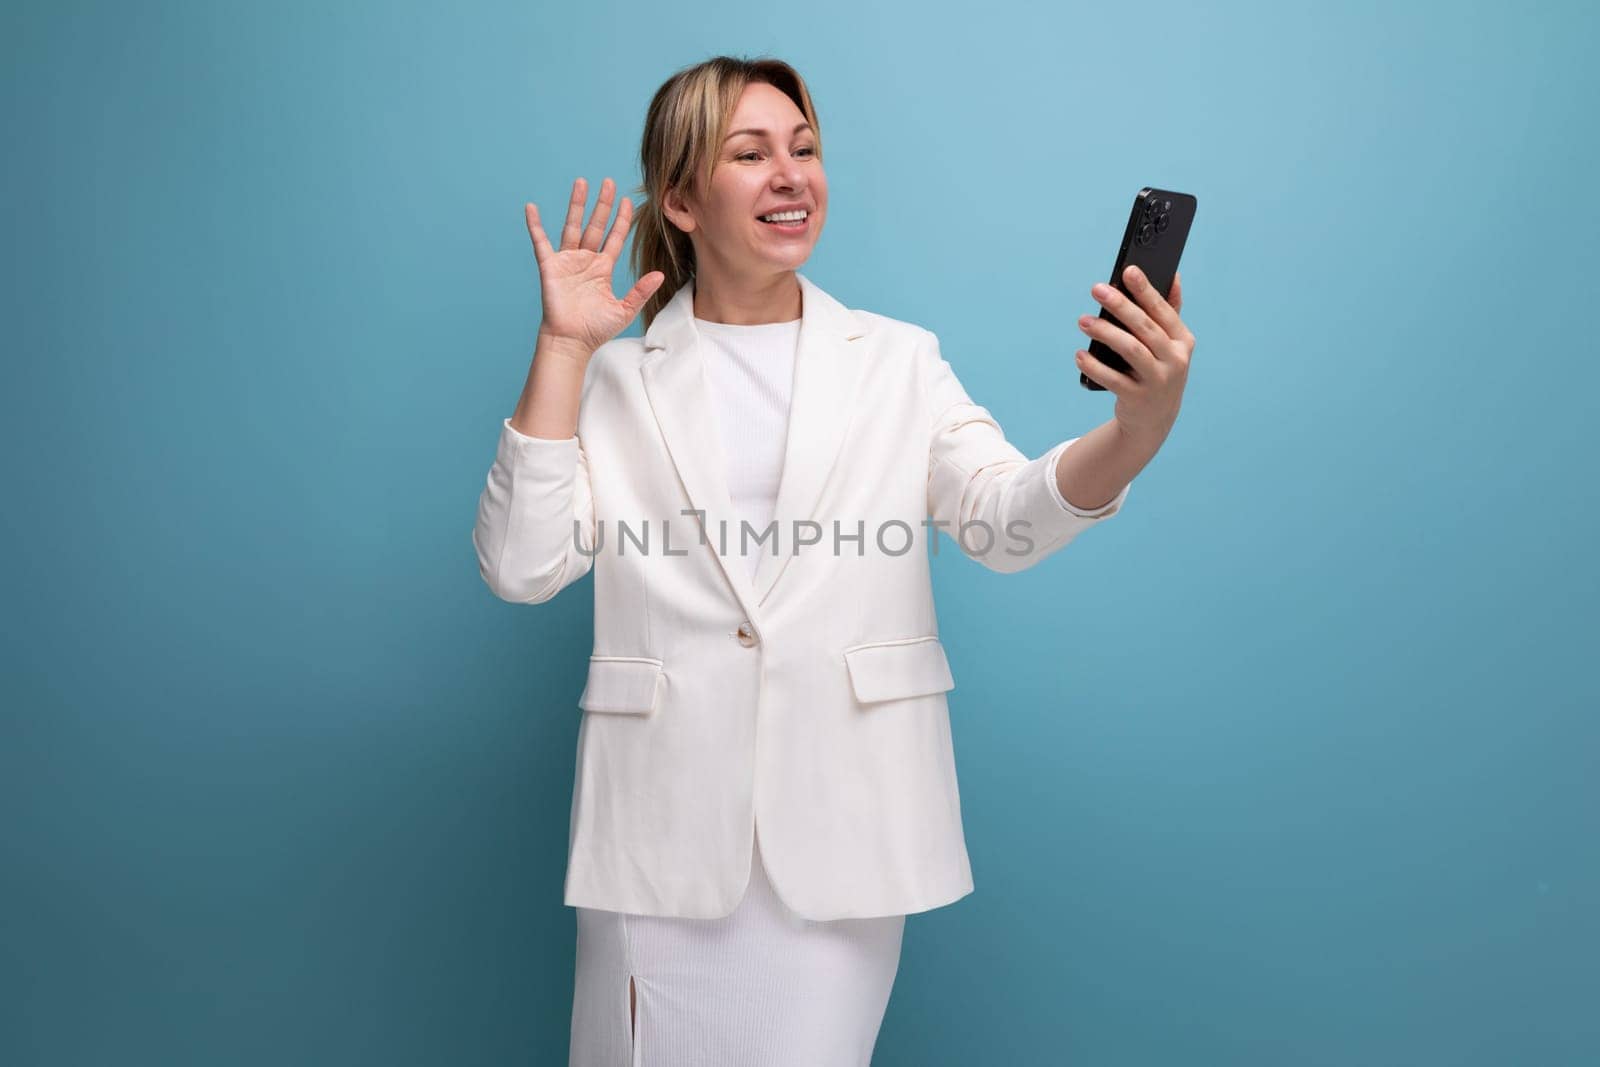 young well-groomed slender blond woman wearing a white jacket and dress uses a smartphone.